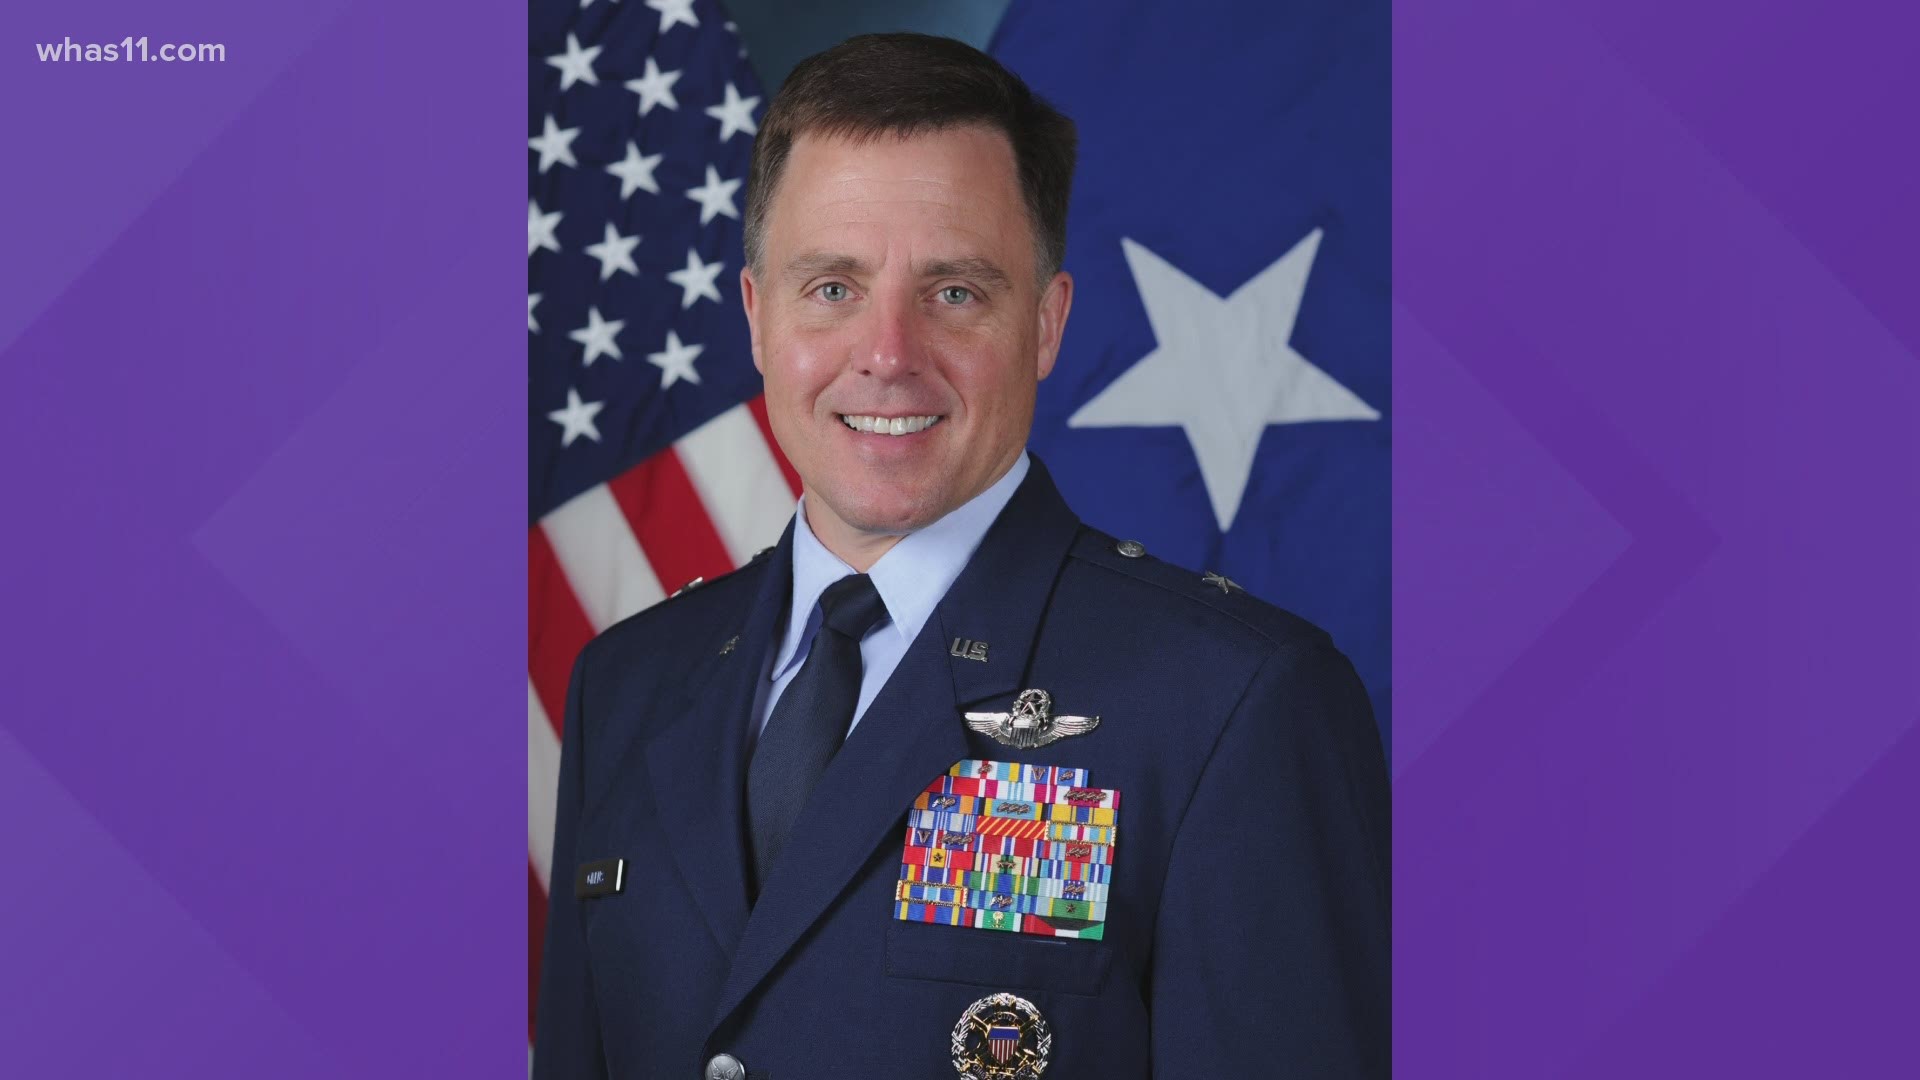 Brigadier-General Rob Givens will join WHAS11's Doug Proffitt and Hayley Minogue for the 2021 Thunder Over Louisville Air Show on April 17.